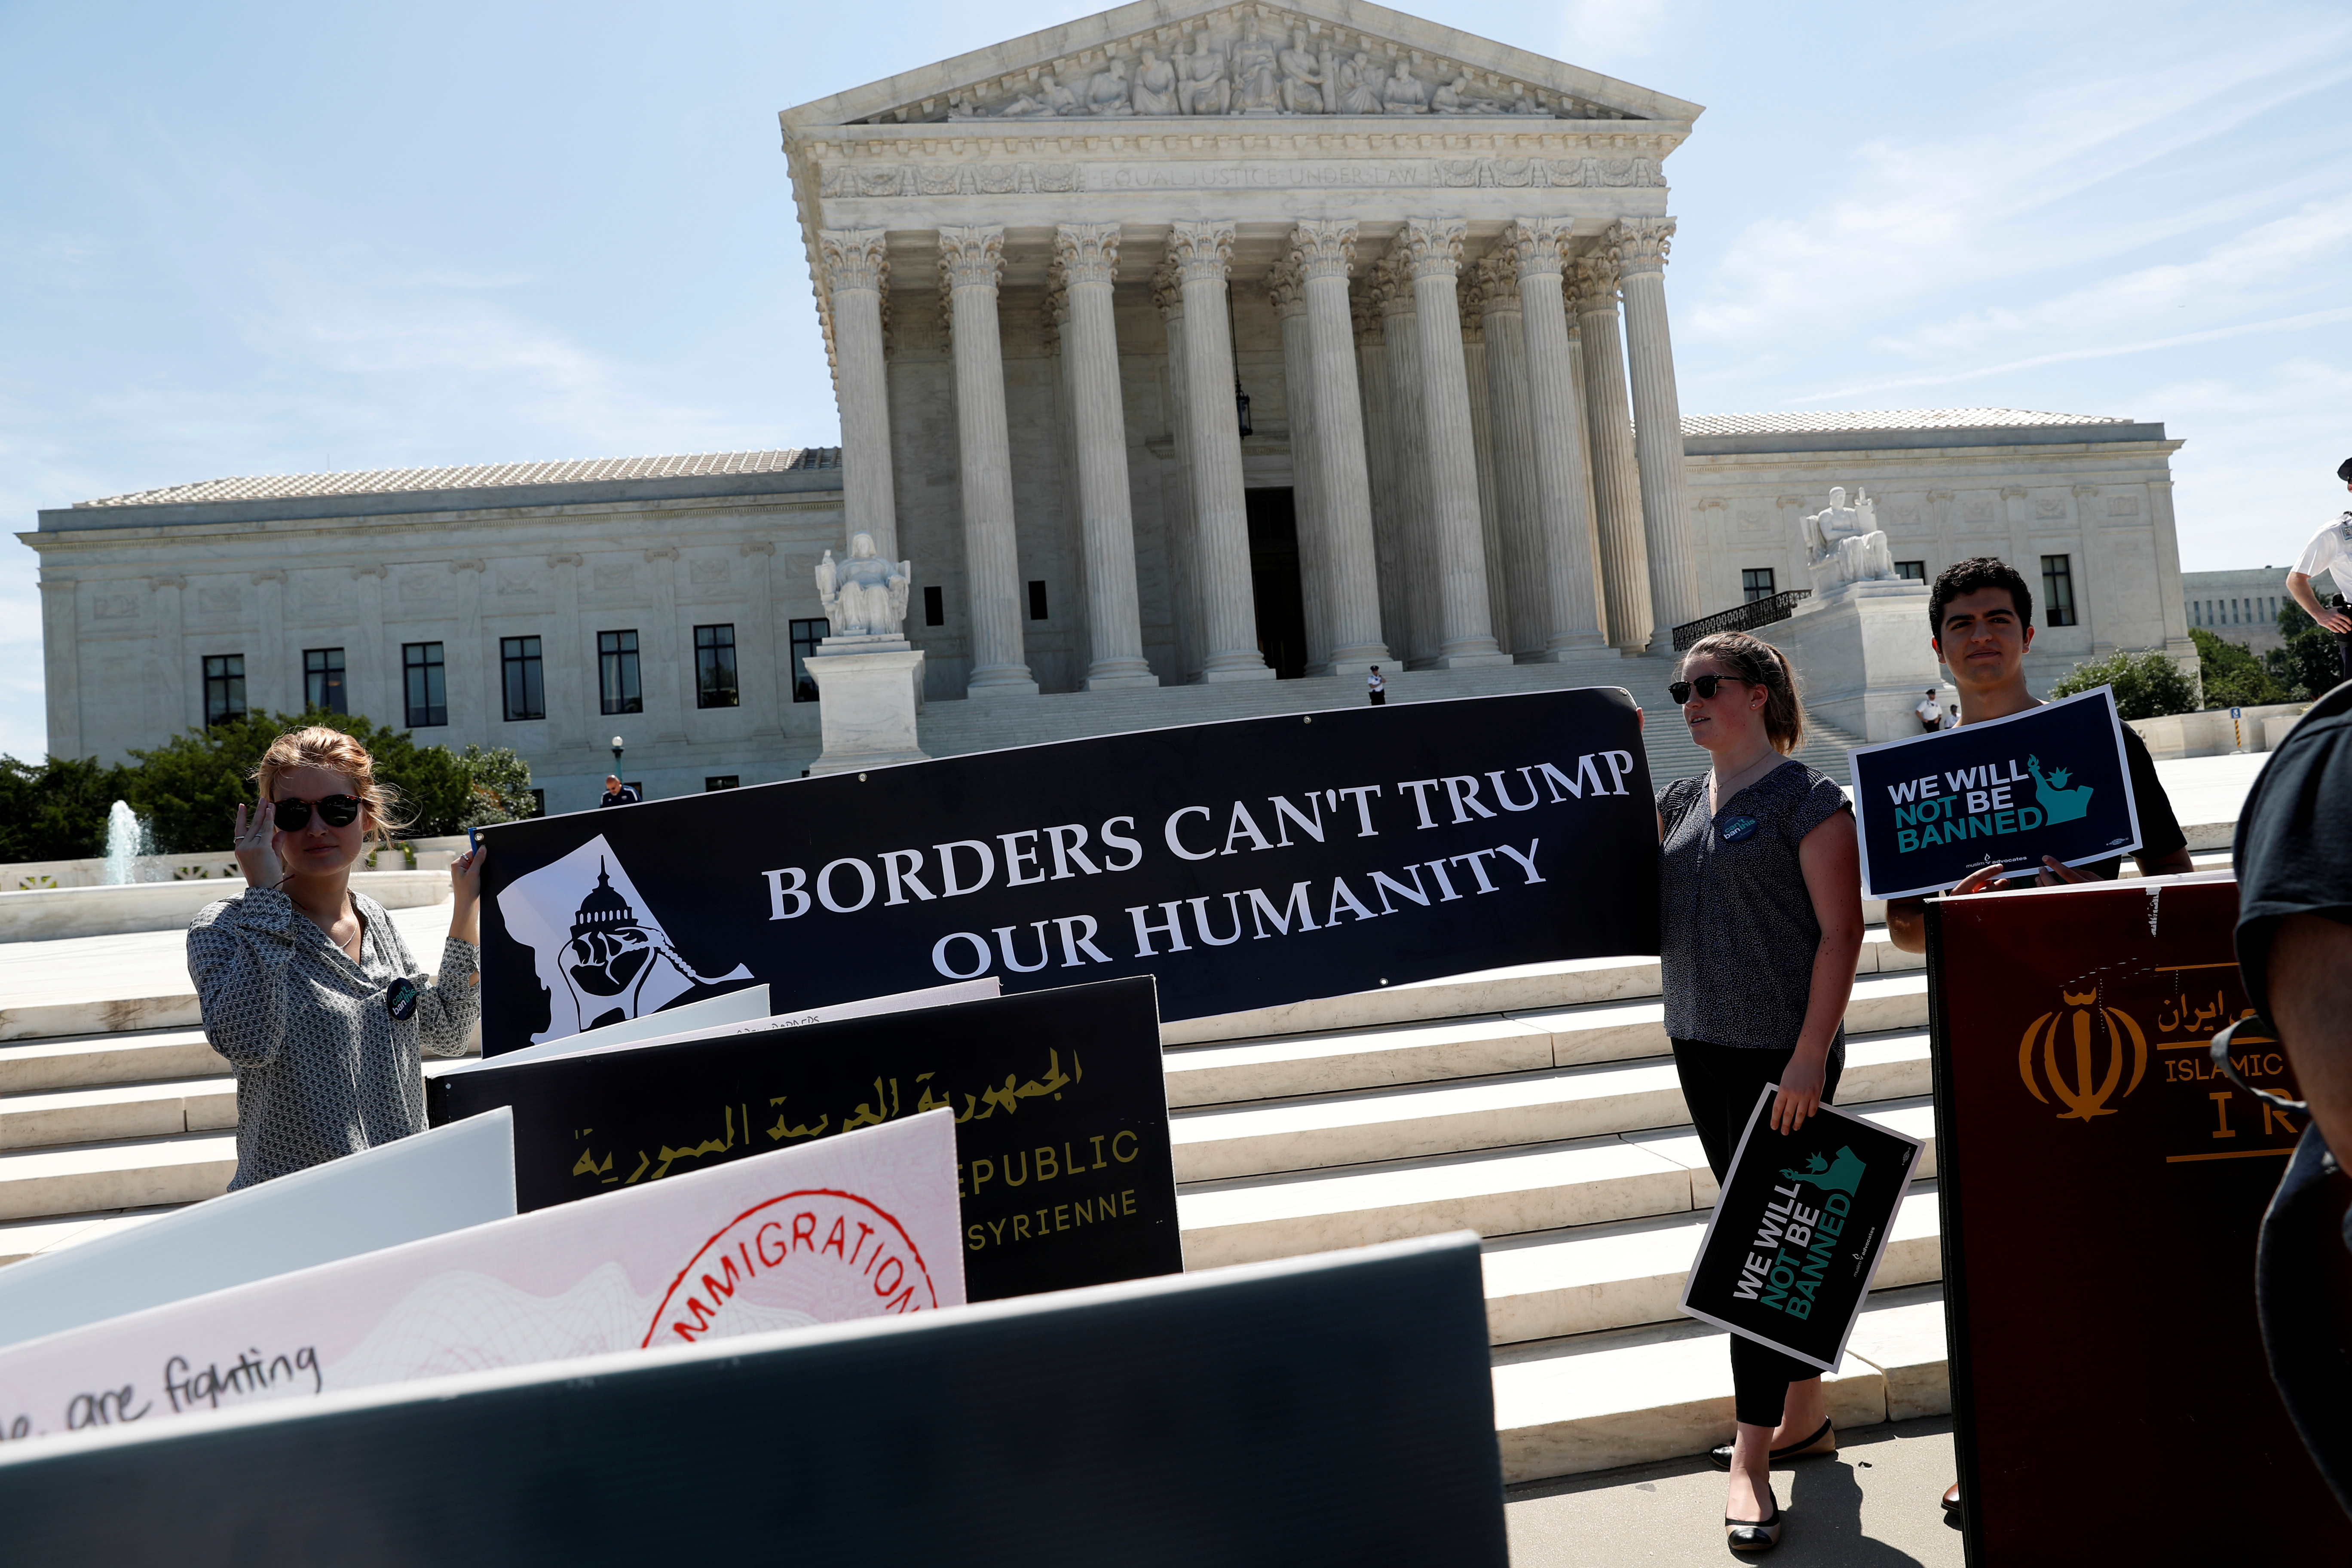 Immigration rights proponents demonstrate outside the U.S. Supreme Court in Washington. REUTERS/Leah Millis